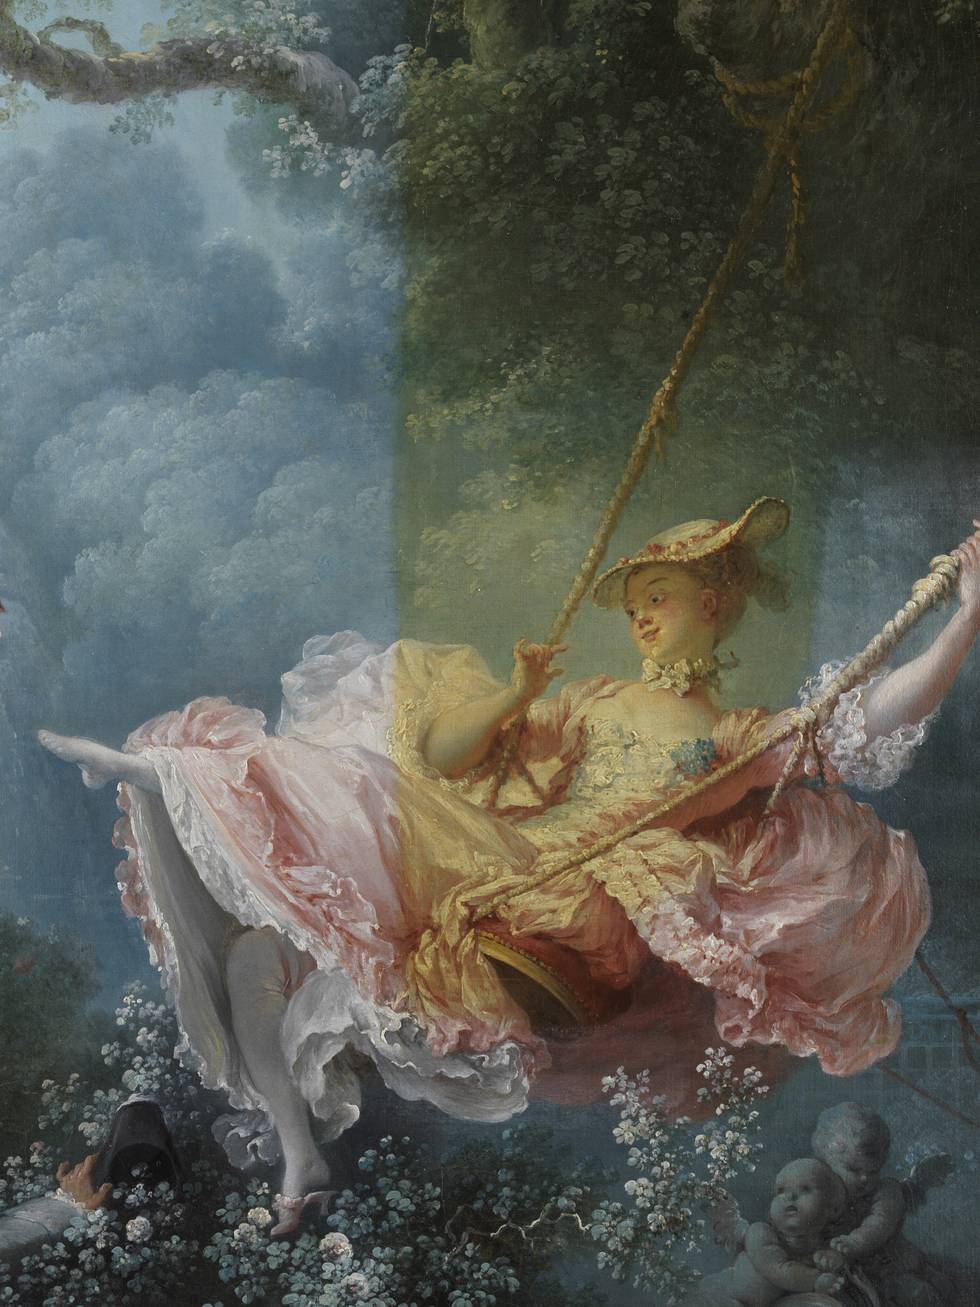 A detail of a painting of a woman being pushed on a swing by two men